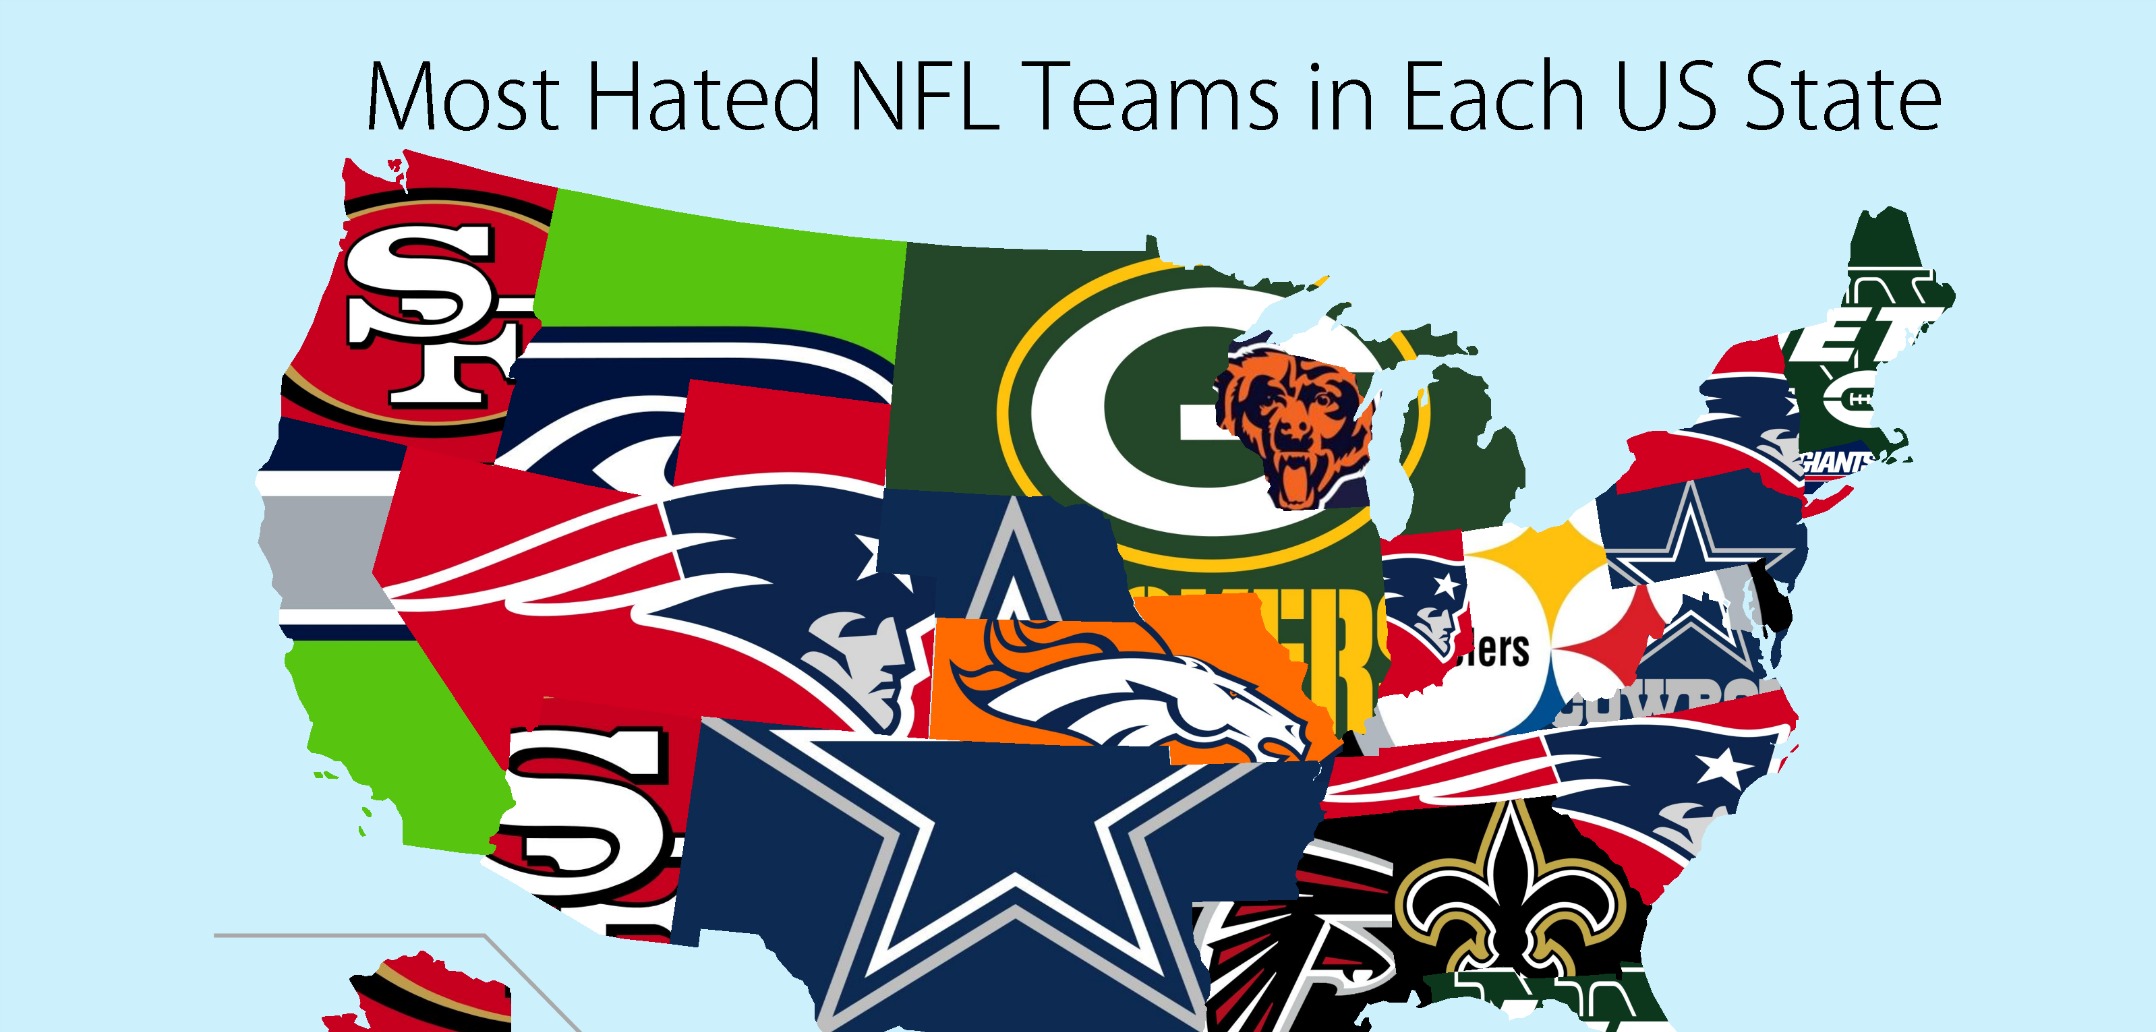 United States Map Of Most Hated Nfl Teams